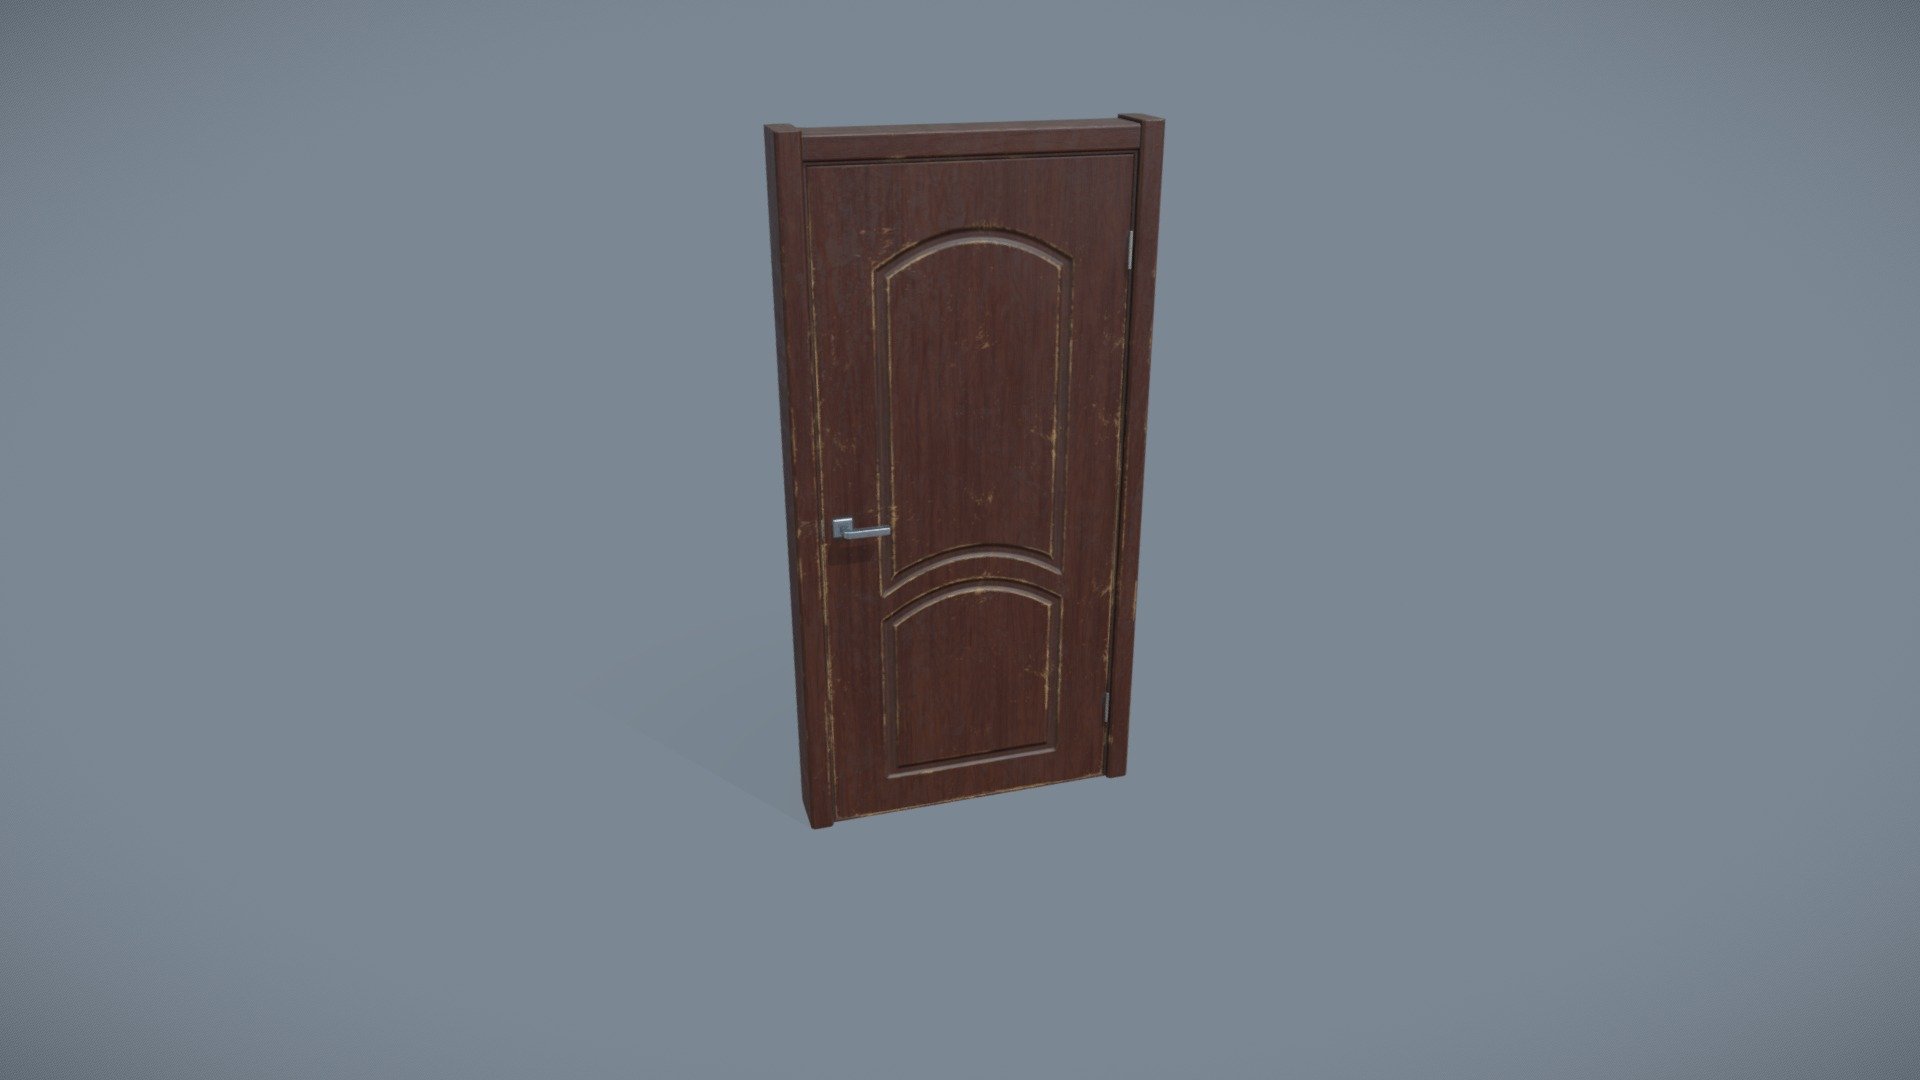 Game ready low-poly Old Door model with PBR textures for game engines/renderers. 

This product is intended for game/real time/background use. This model is not intended for subdivision. Geometry is triangulated. Model unwrapped manually. All materials and objects named appropriately. Scaled to approximate real world size. Tested in Marmoset Toolbag 3. Tested in Unreal Engine 4. Tested in Unity. No special plugins needed. .obj and .fbx versions exported from Blender 2.83.

Polycount: 754 tris, 426 vertices.

4096x4096 textures in png format:
- General PBR Metallic/Roughness  textures: BaseColor, Metallic, Roughness, Normal, AO;
- Unity Textures: Albedo, MetallicSmoothness, Normal, AO;
- Unreal Engine 4 textures: BaseColor, OcclusionRoughnessMetallic, Normal;
- PBR Specular/Glossiness textures: Diffuse, Specular, Glossiness, Normal, AO.

Also included clean variant of textures without damage.
 - Old Door - Buy Royalty Free 3D model by AshMesh 3d model